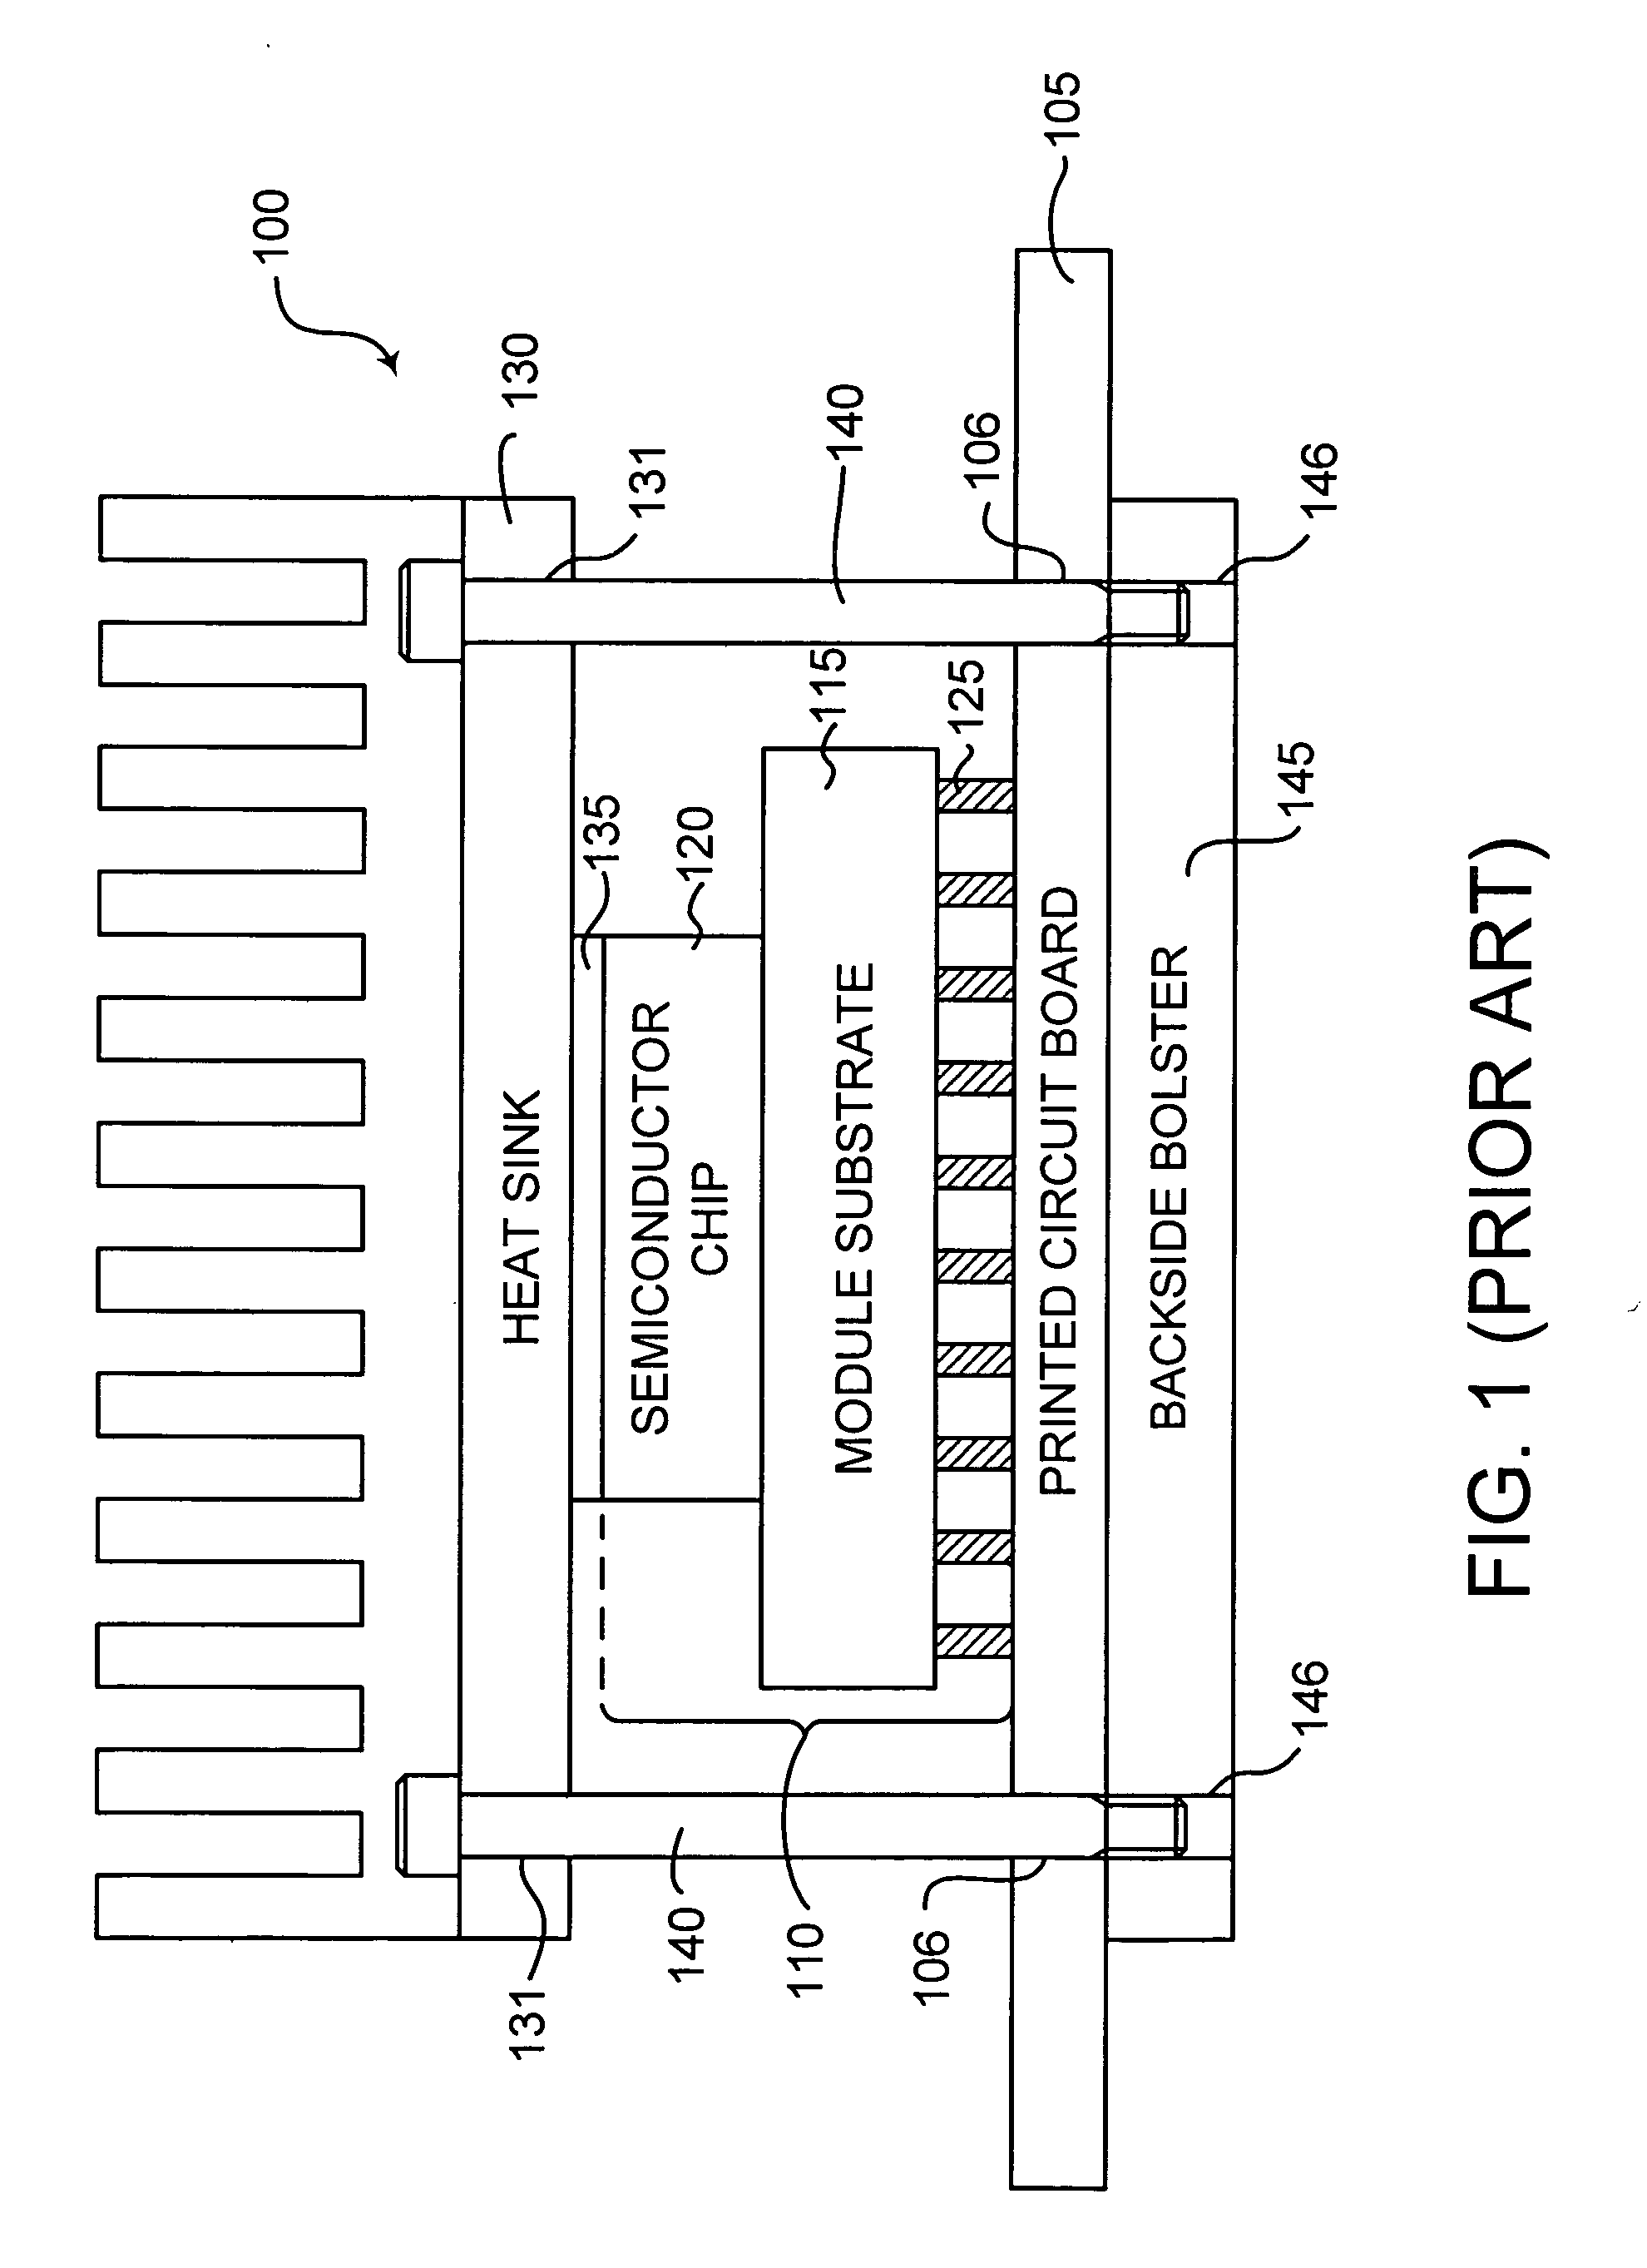 Method and apparatus for mounting a heat sink in thermal contact with an electronic component